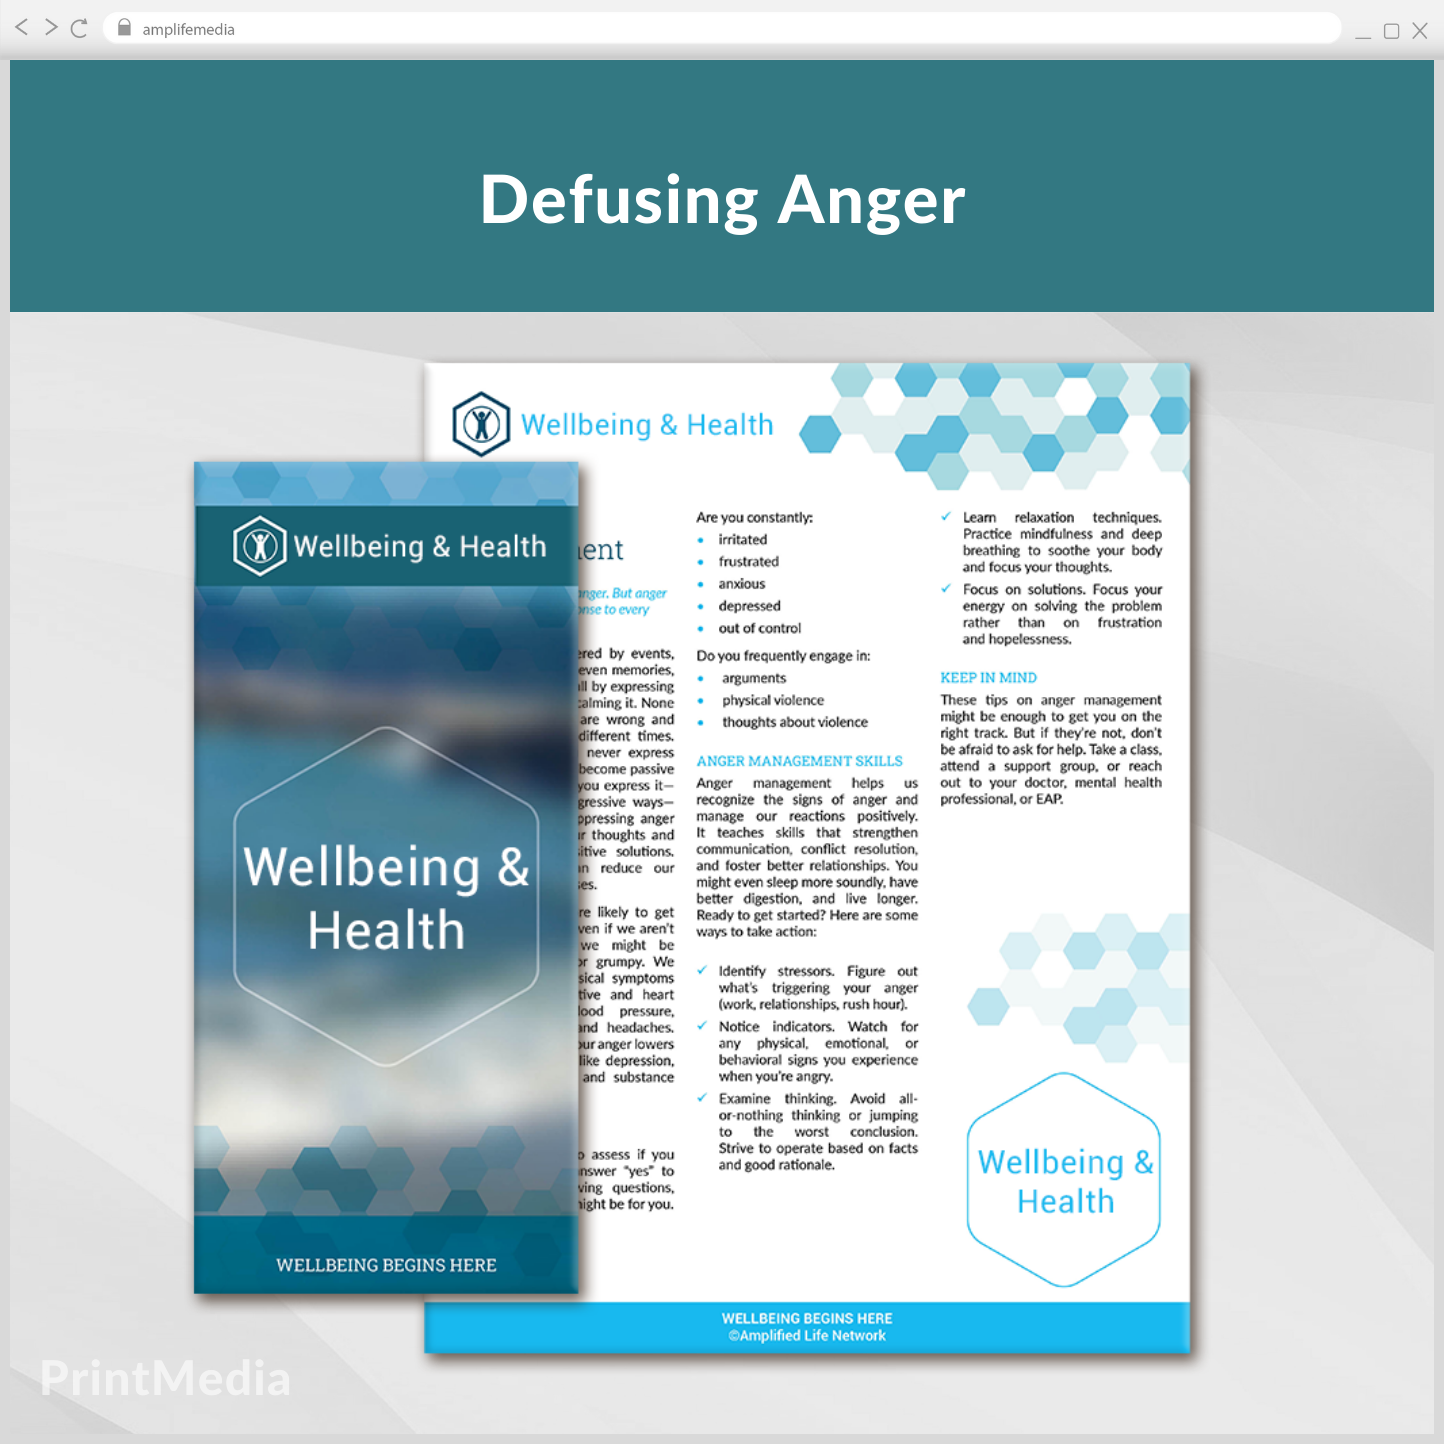 Subscription to Wellbeing Media: Defusing Anger PrintMedia 1222